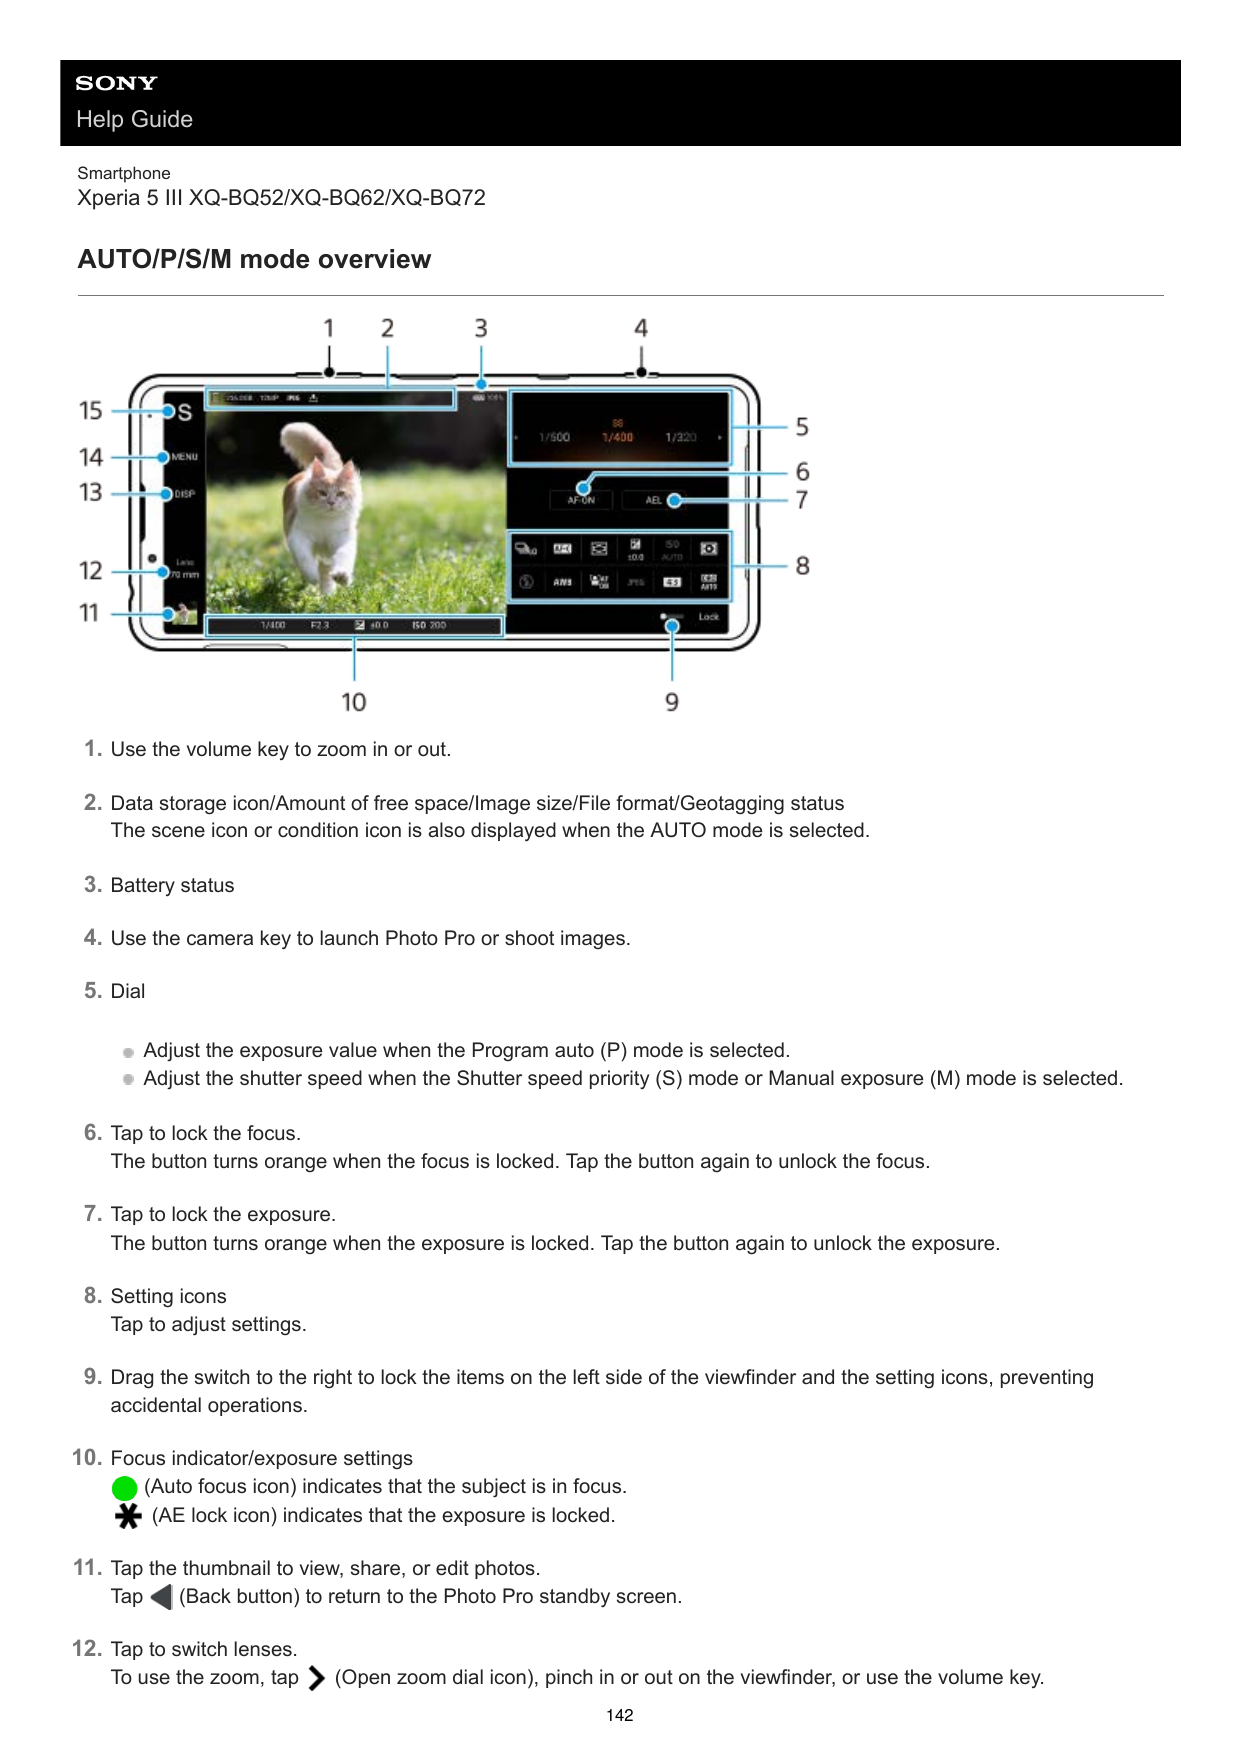 Help GuideSmartphoneXperia 5 III XQ-BQ52/XQ-BQ62/XQ-BQ72AUTO/P/S/M mode overview1. Use the volume key to zoom in or out.2. Data 